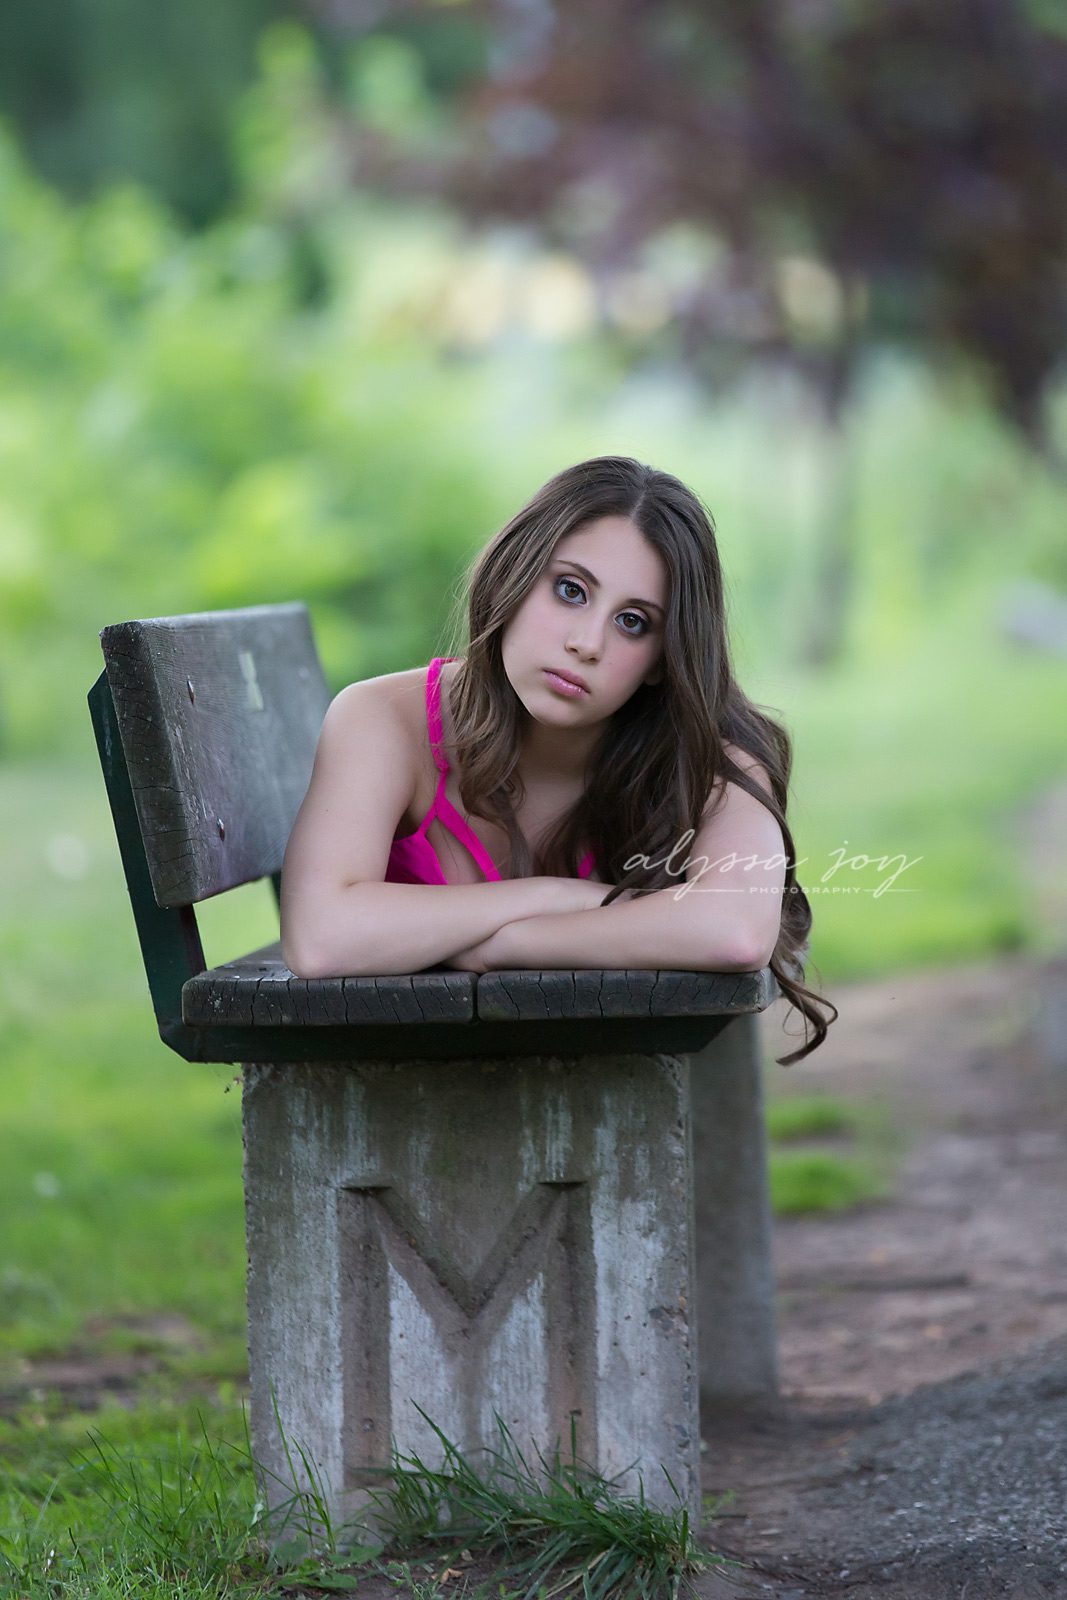 teen girl laying on a bench in the park with her first initial engraved into the bench